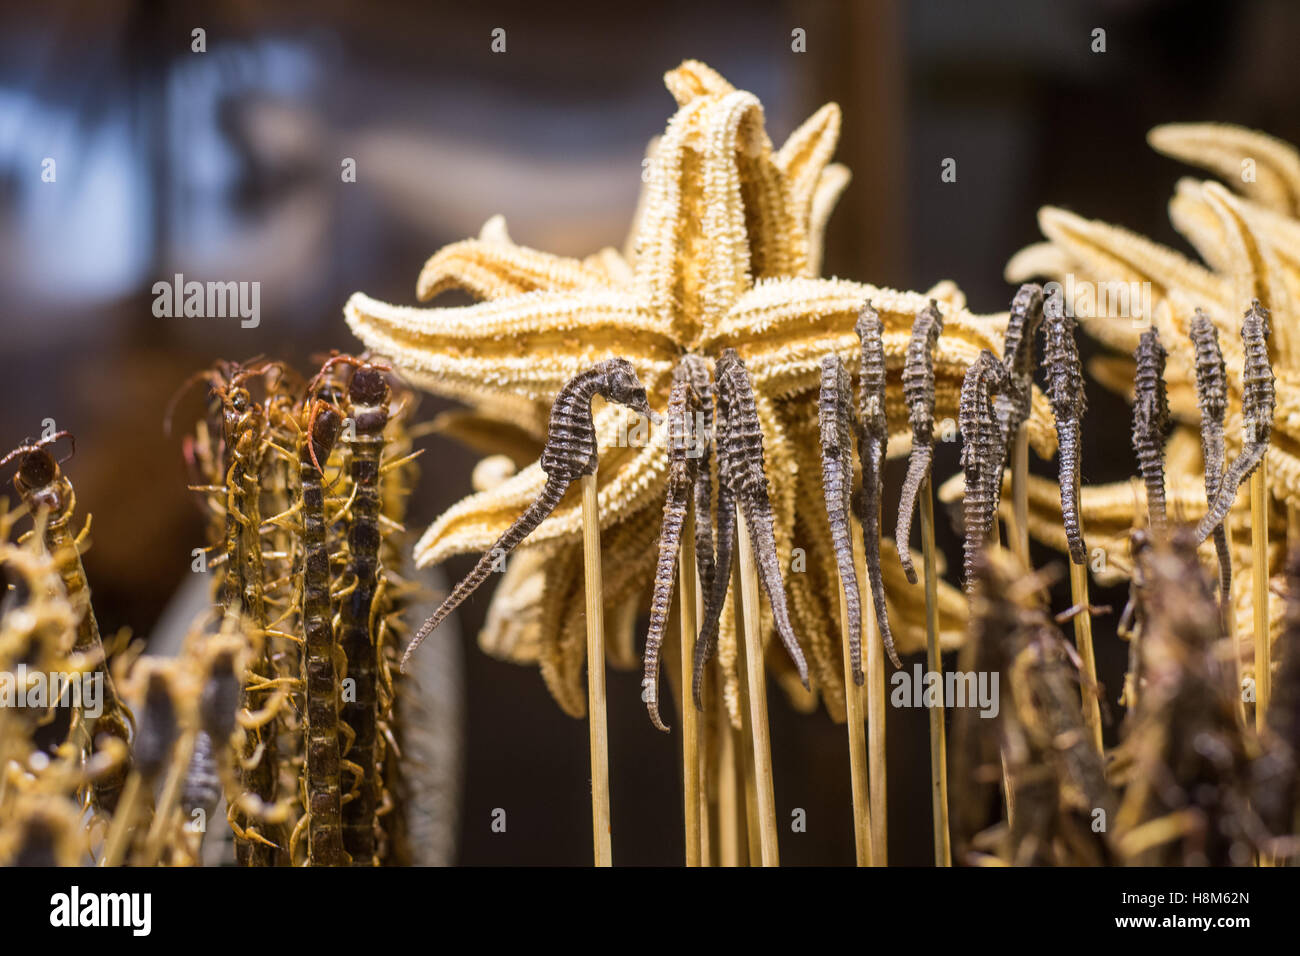 Beijing, China - Cooked scorpions, centipedes, sea horses and starfish for sale at the Donghuamen Snack Night Market, a large ou Stock Photo